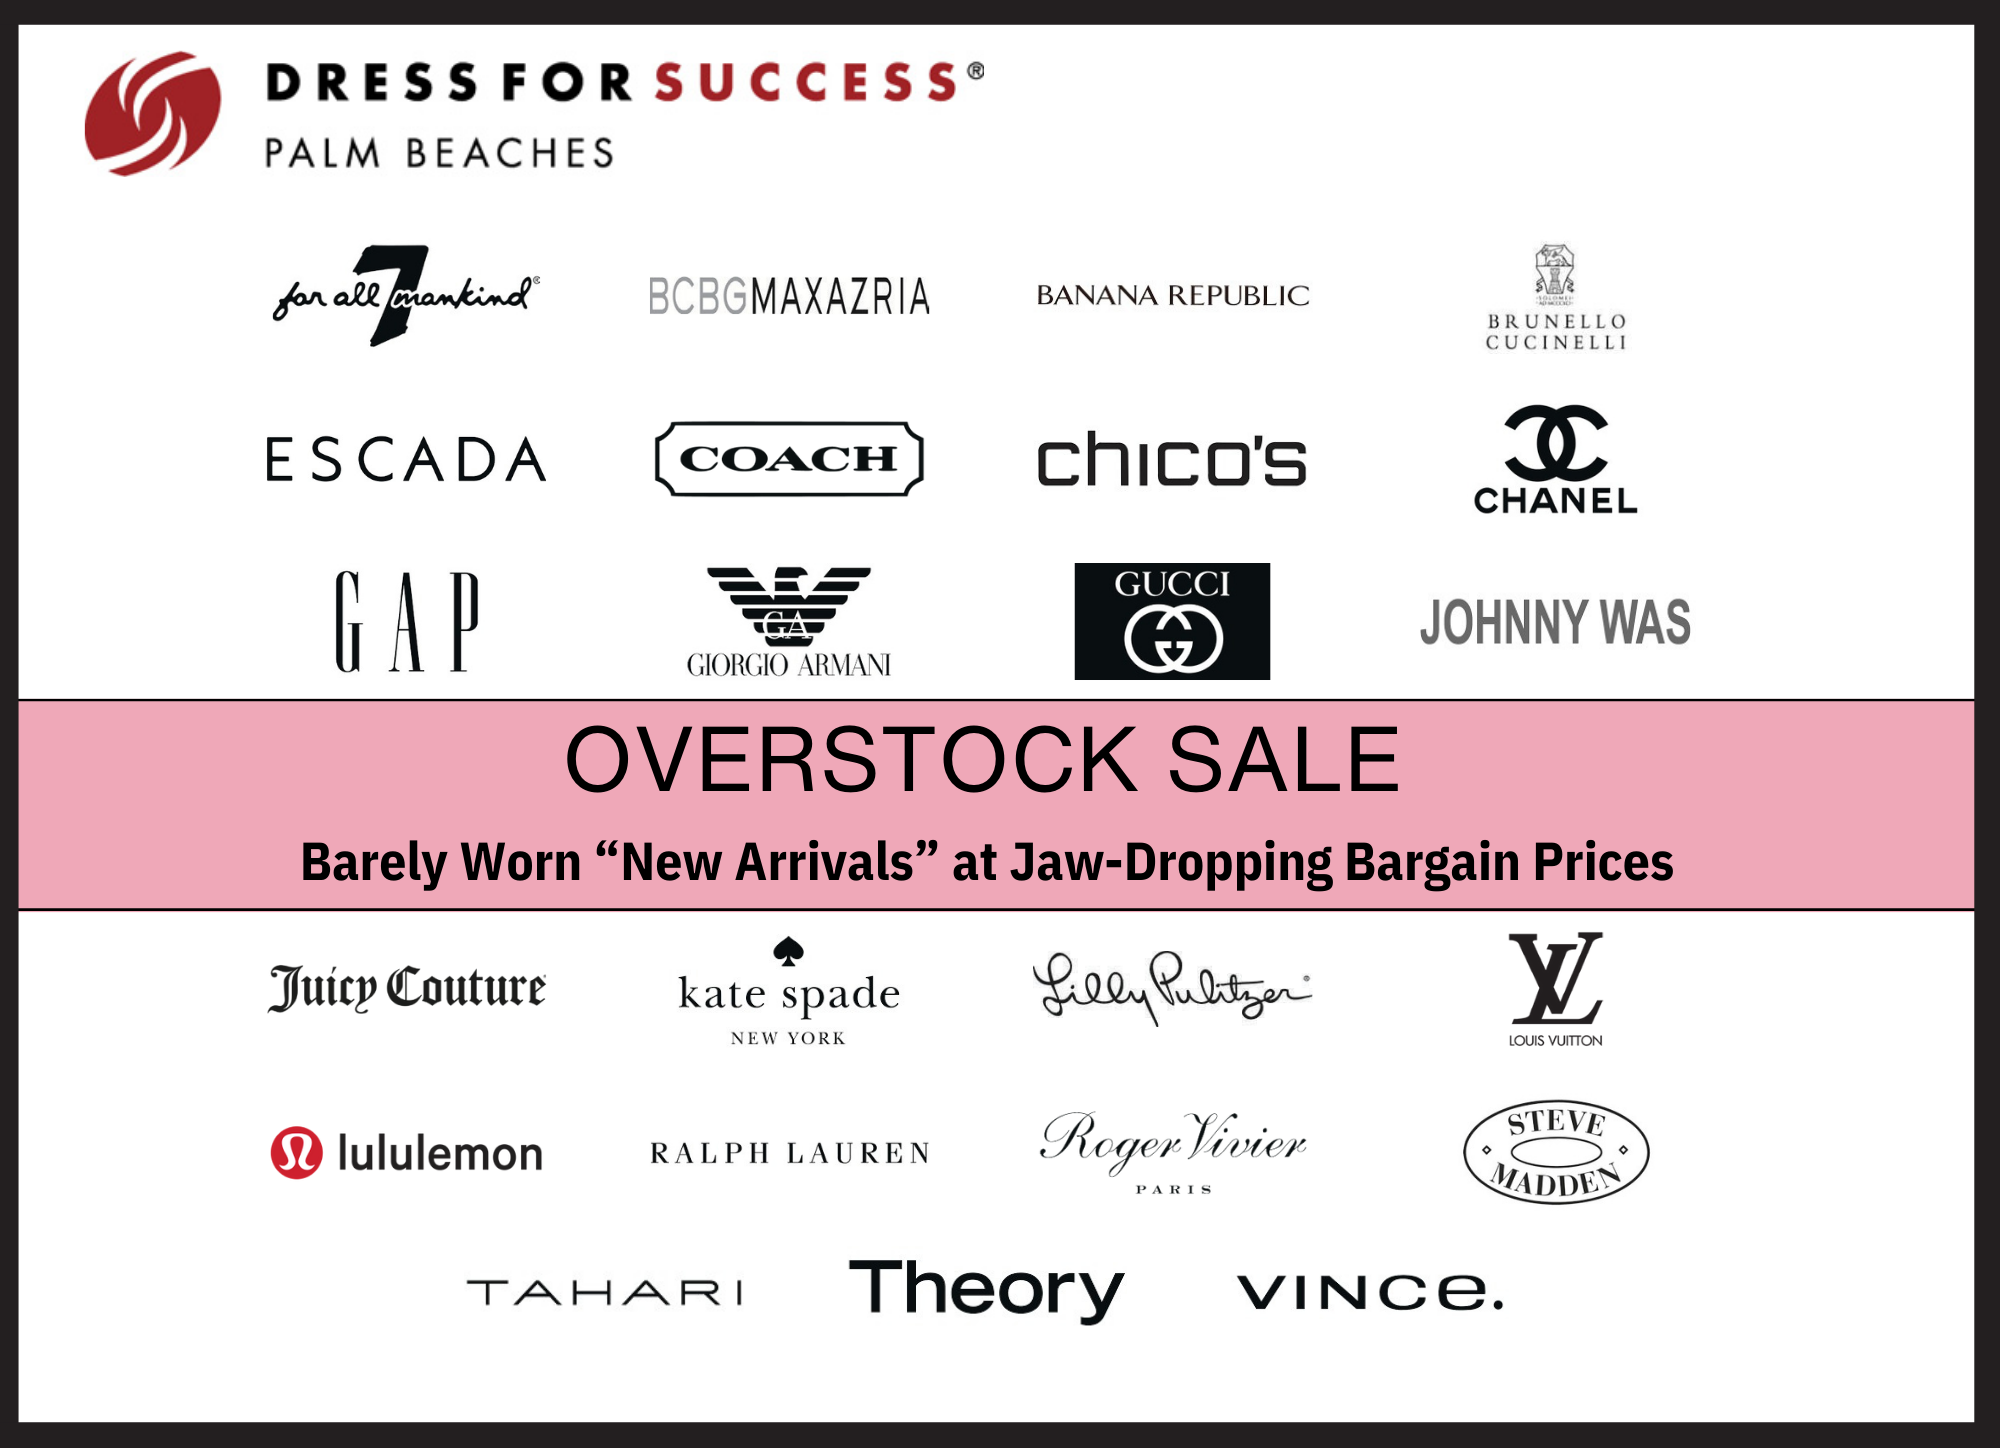 Overstock Sale - Dress for Success Palm Beaches